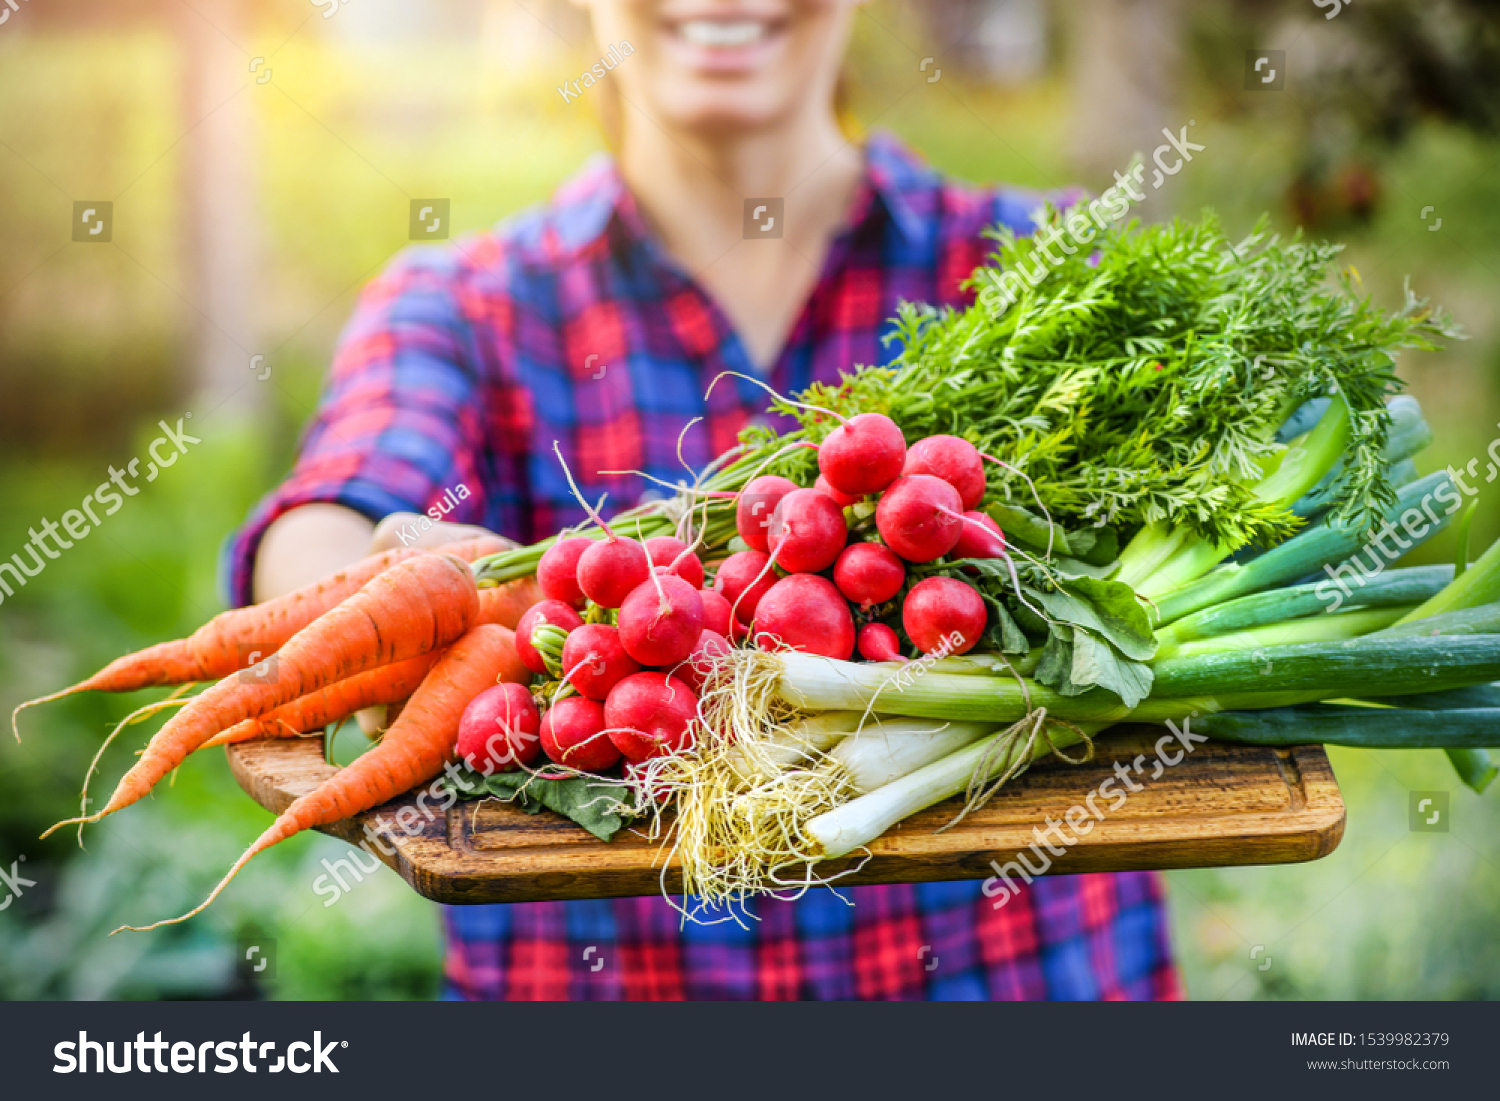 Fresh vegetables in woman hands on old wooden cut board. Healthy farmer food concept. #1539982379